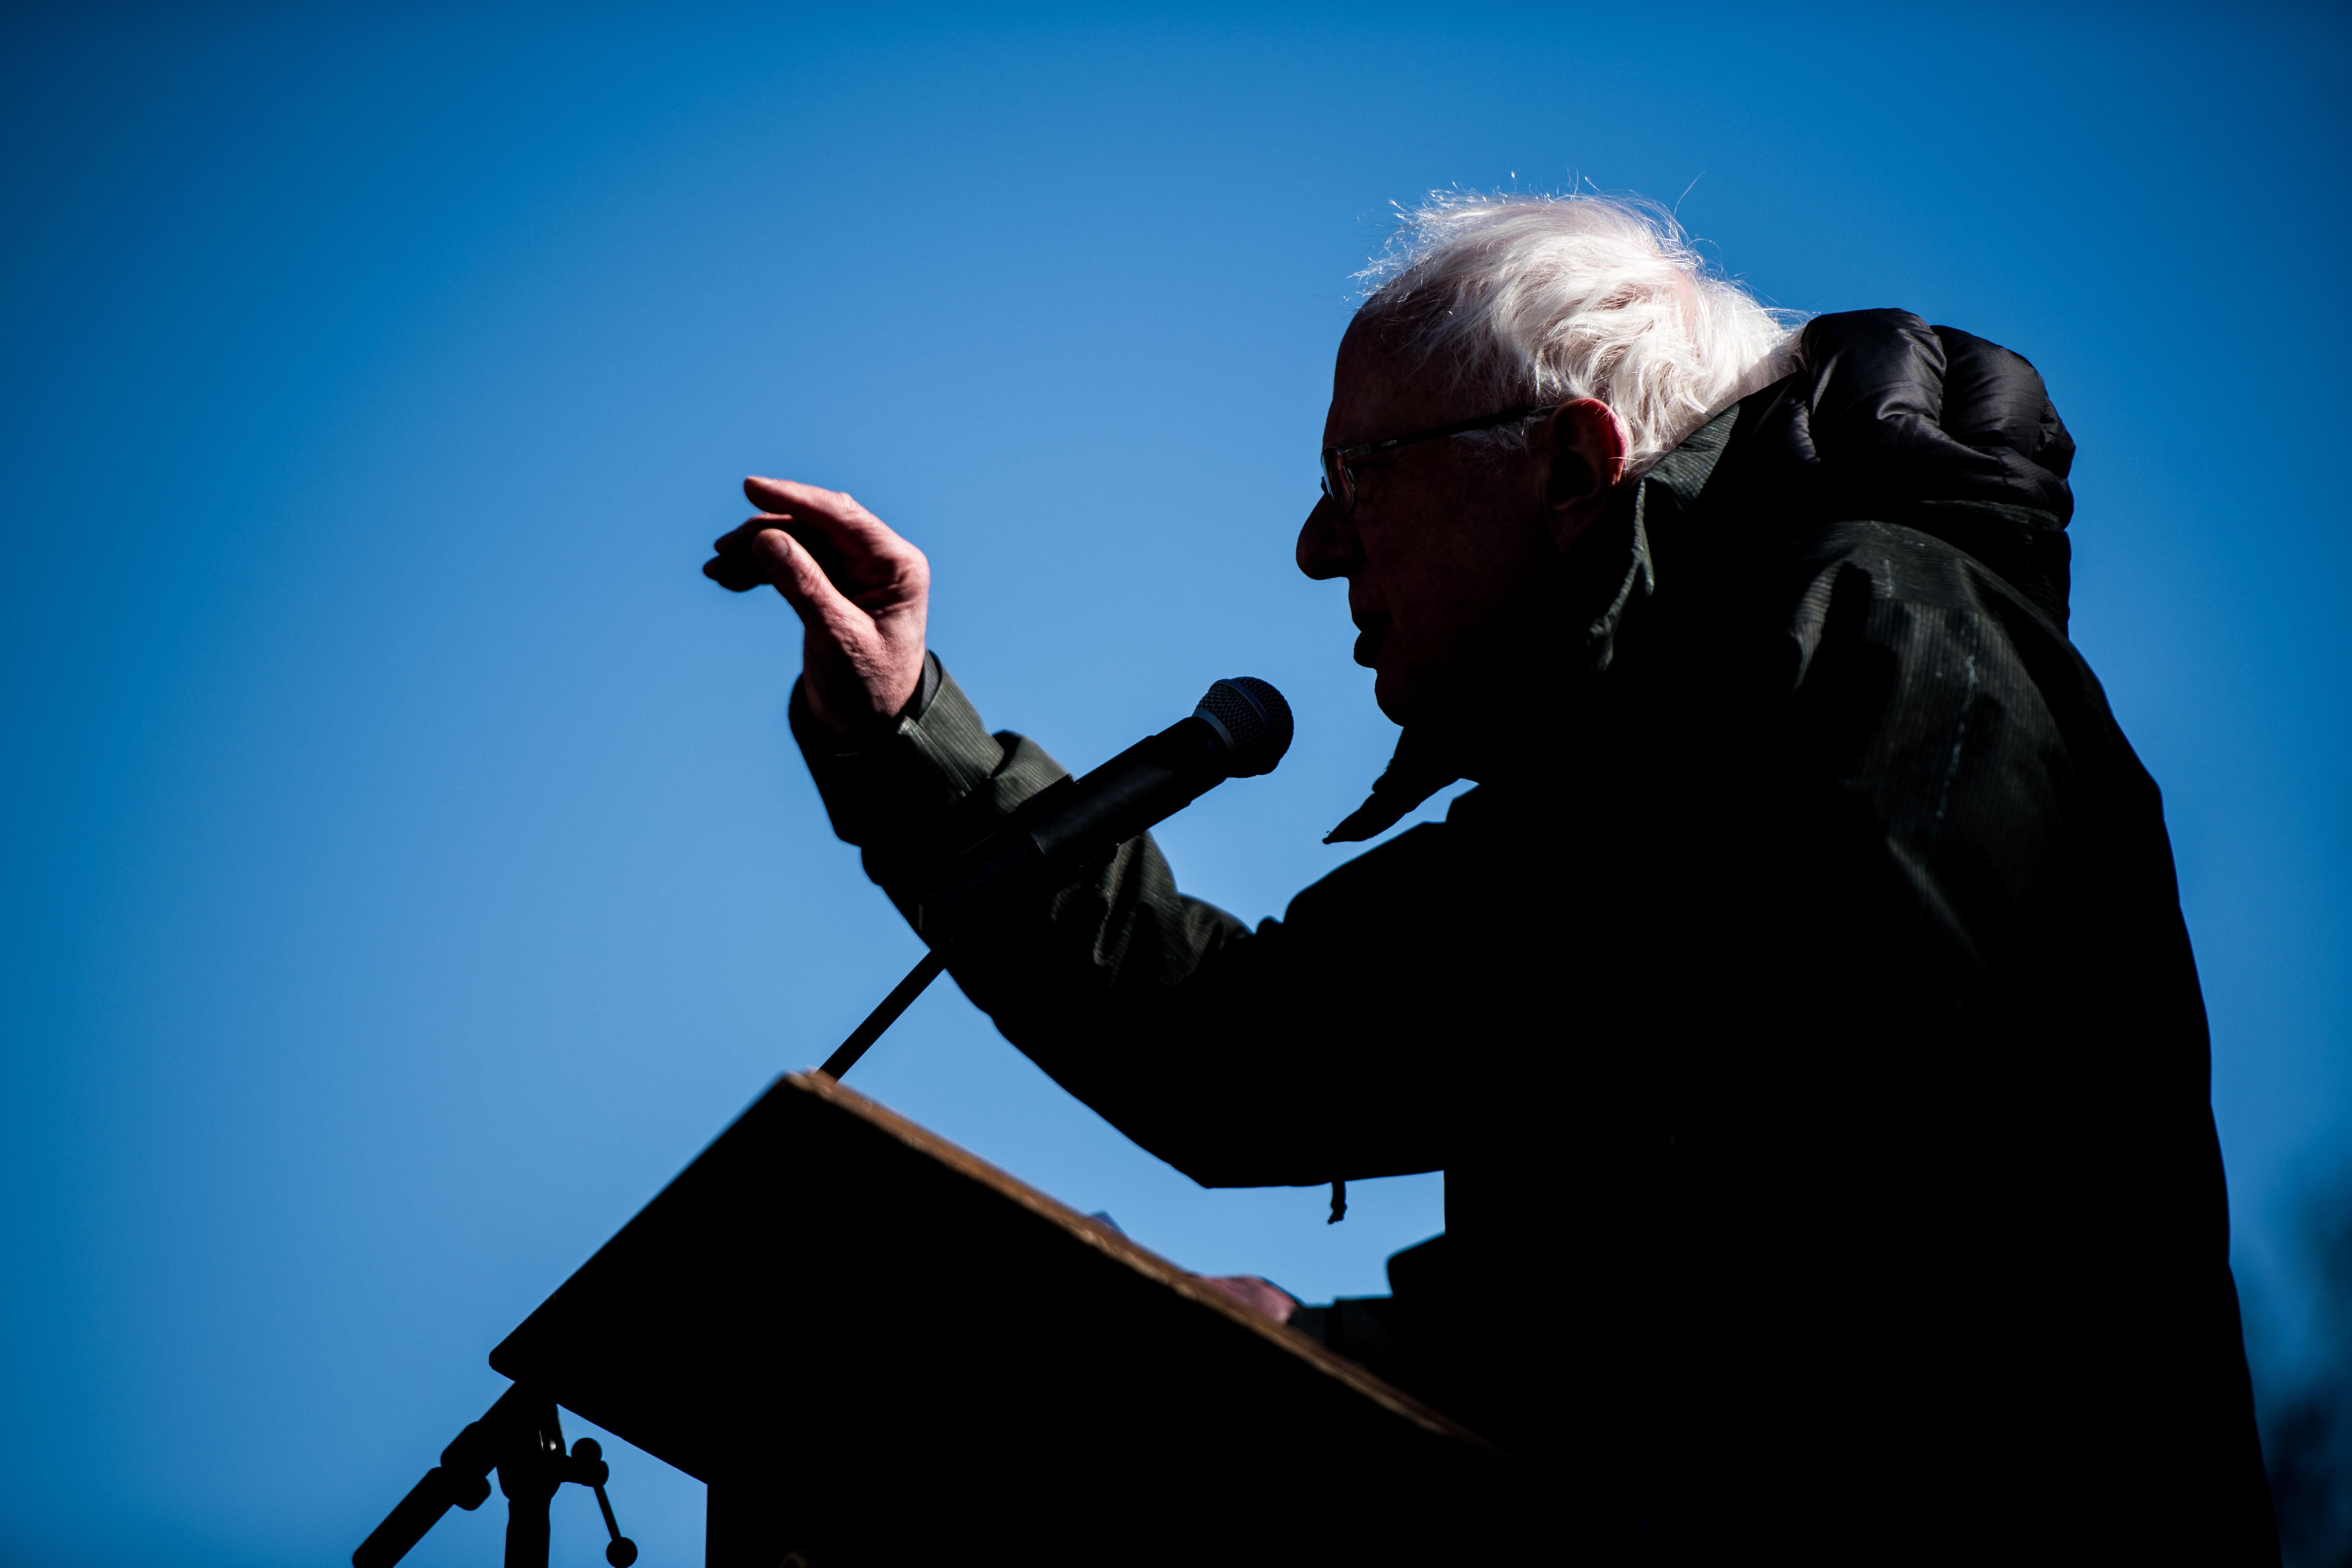 U.S. Sen. Bernie Sanders (I-VT) addresses the crowd during the annual Martin Luther King Jr. Day at the Dome event on January 21, 2019 in Columbia, South Carolina. (Photo: Sean Rayford/Getty Images)